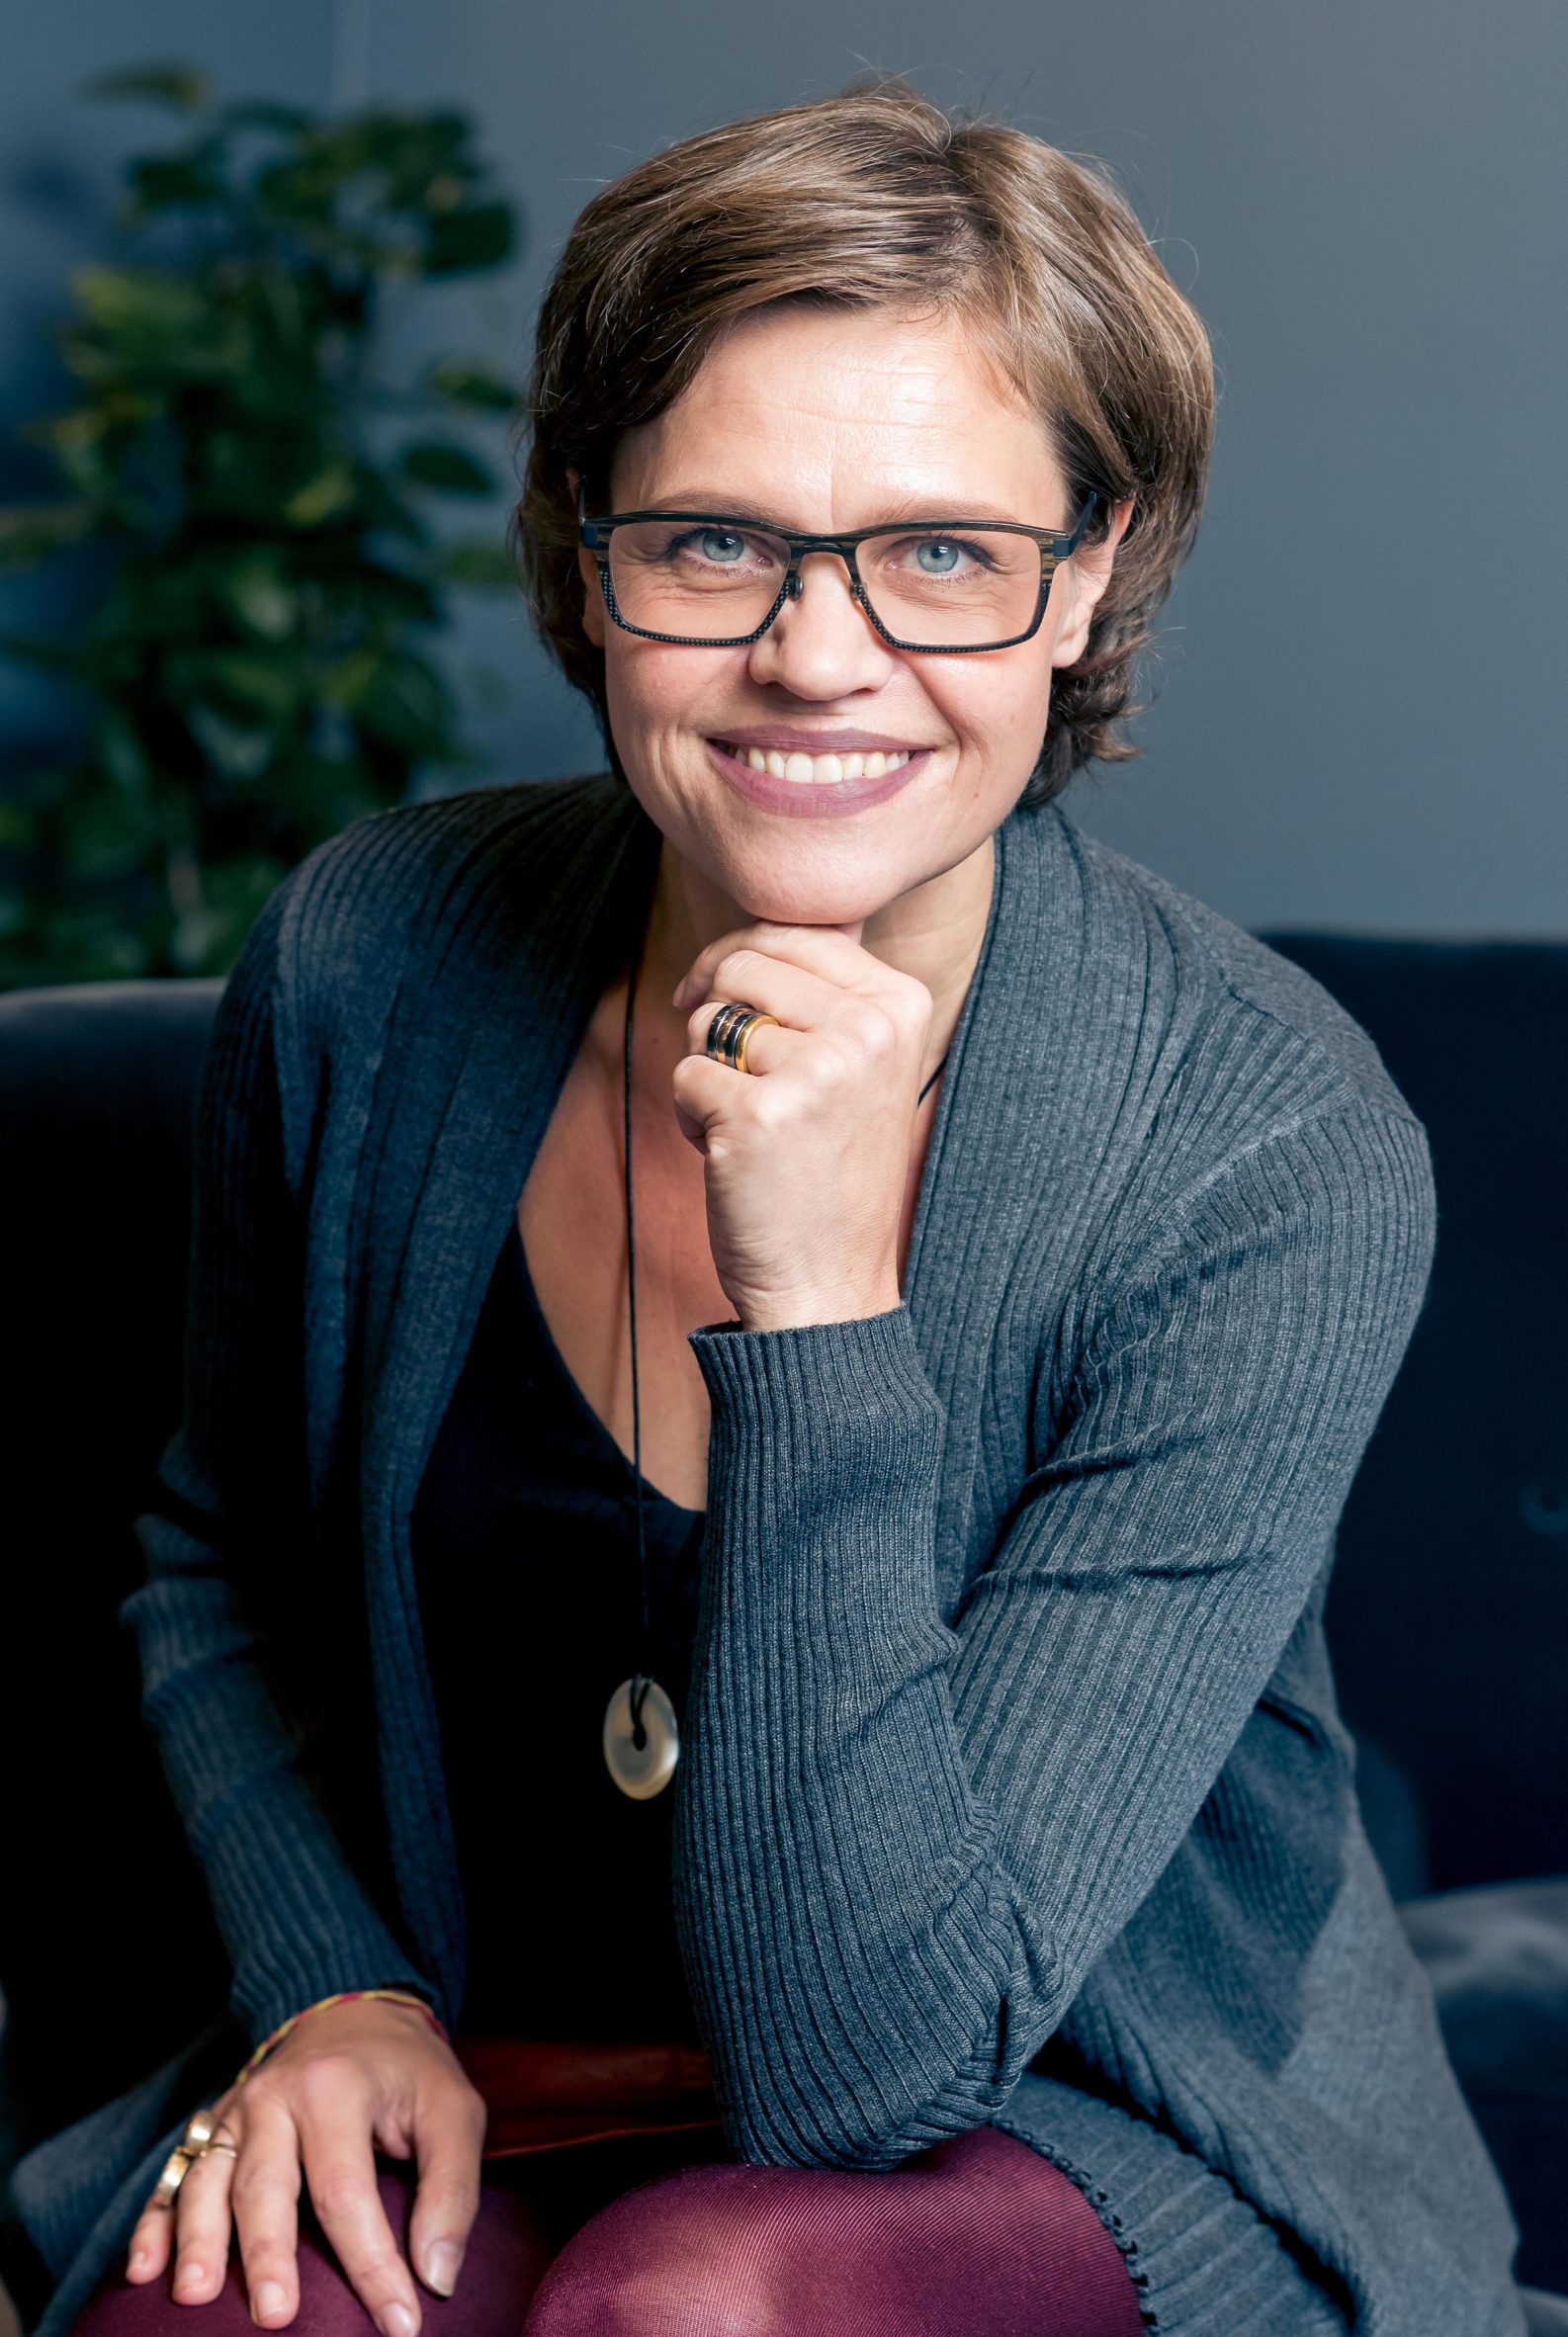 Pernilla Johansson, chief design officer at Electrolux